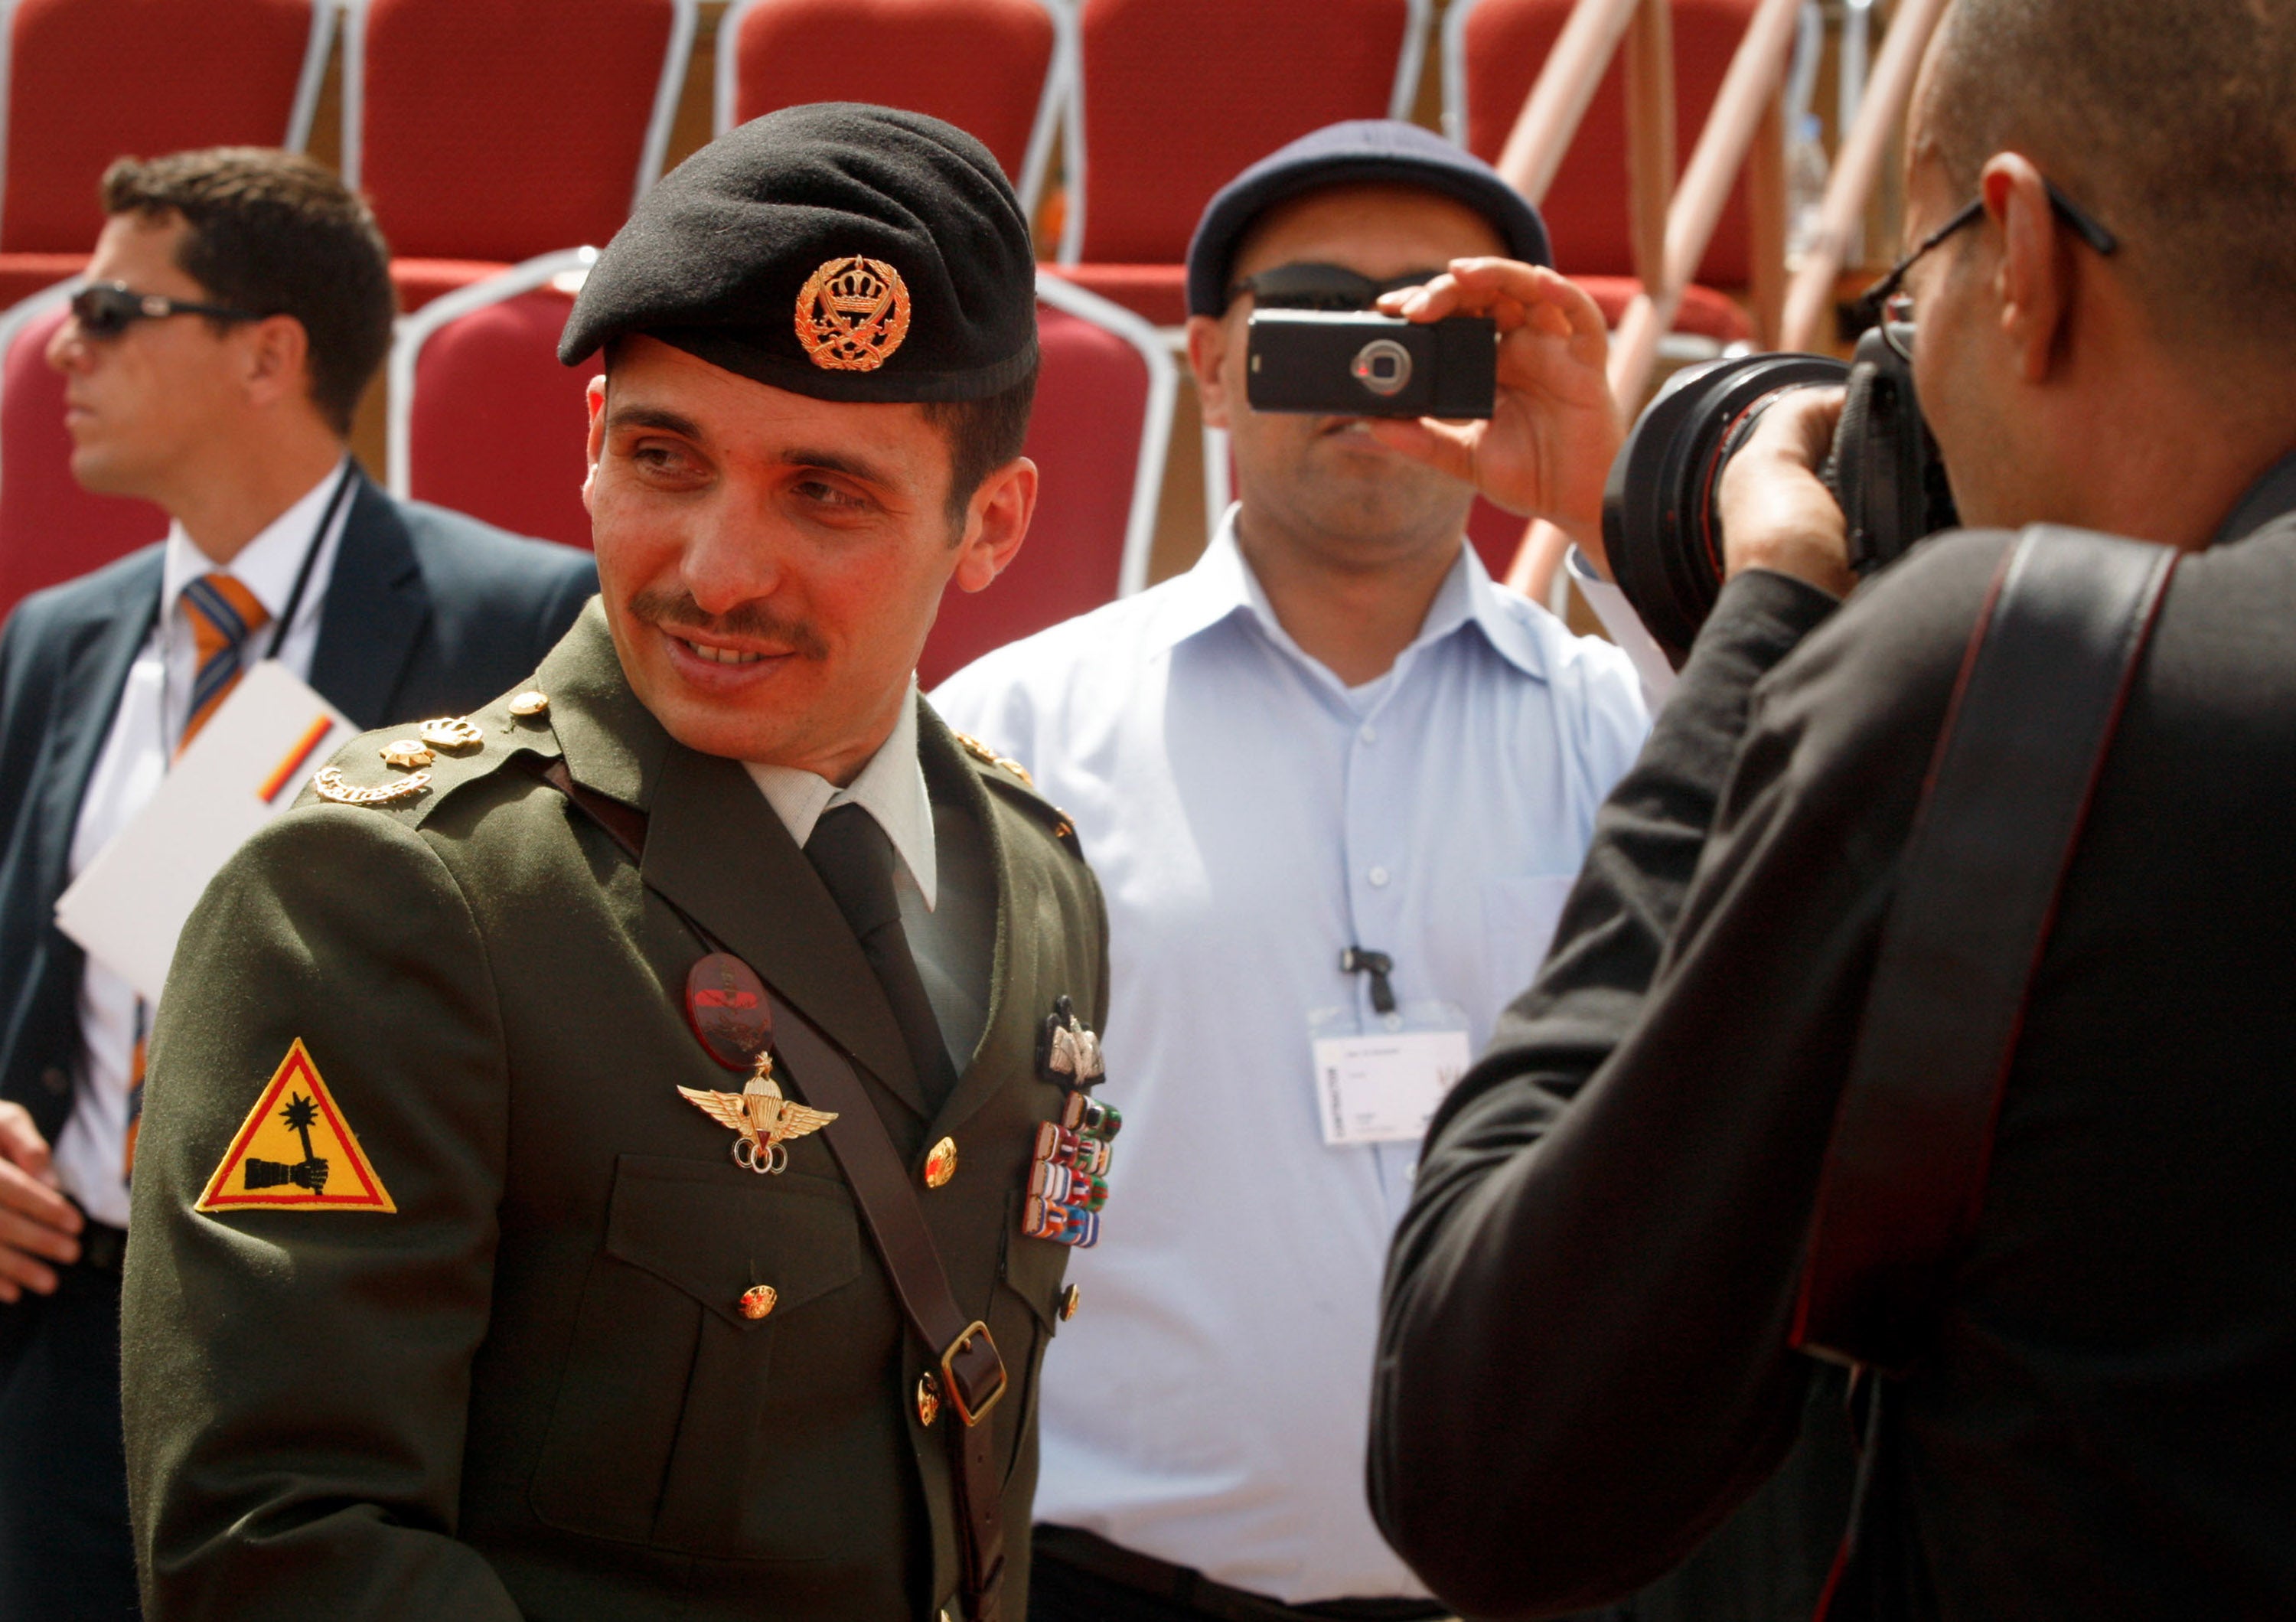 Prince Hamzah Bin al-Hussein attends the SOFEX Jordan (Special Operations Forces Exhibition and Conference) on 11 May 2010 in Amman, Jordan